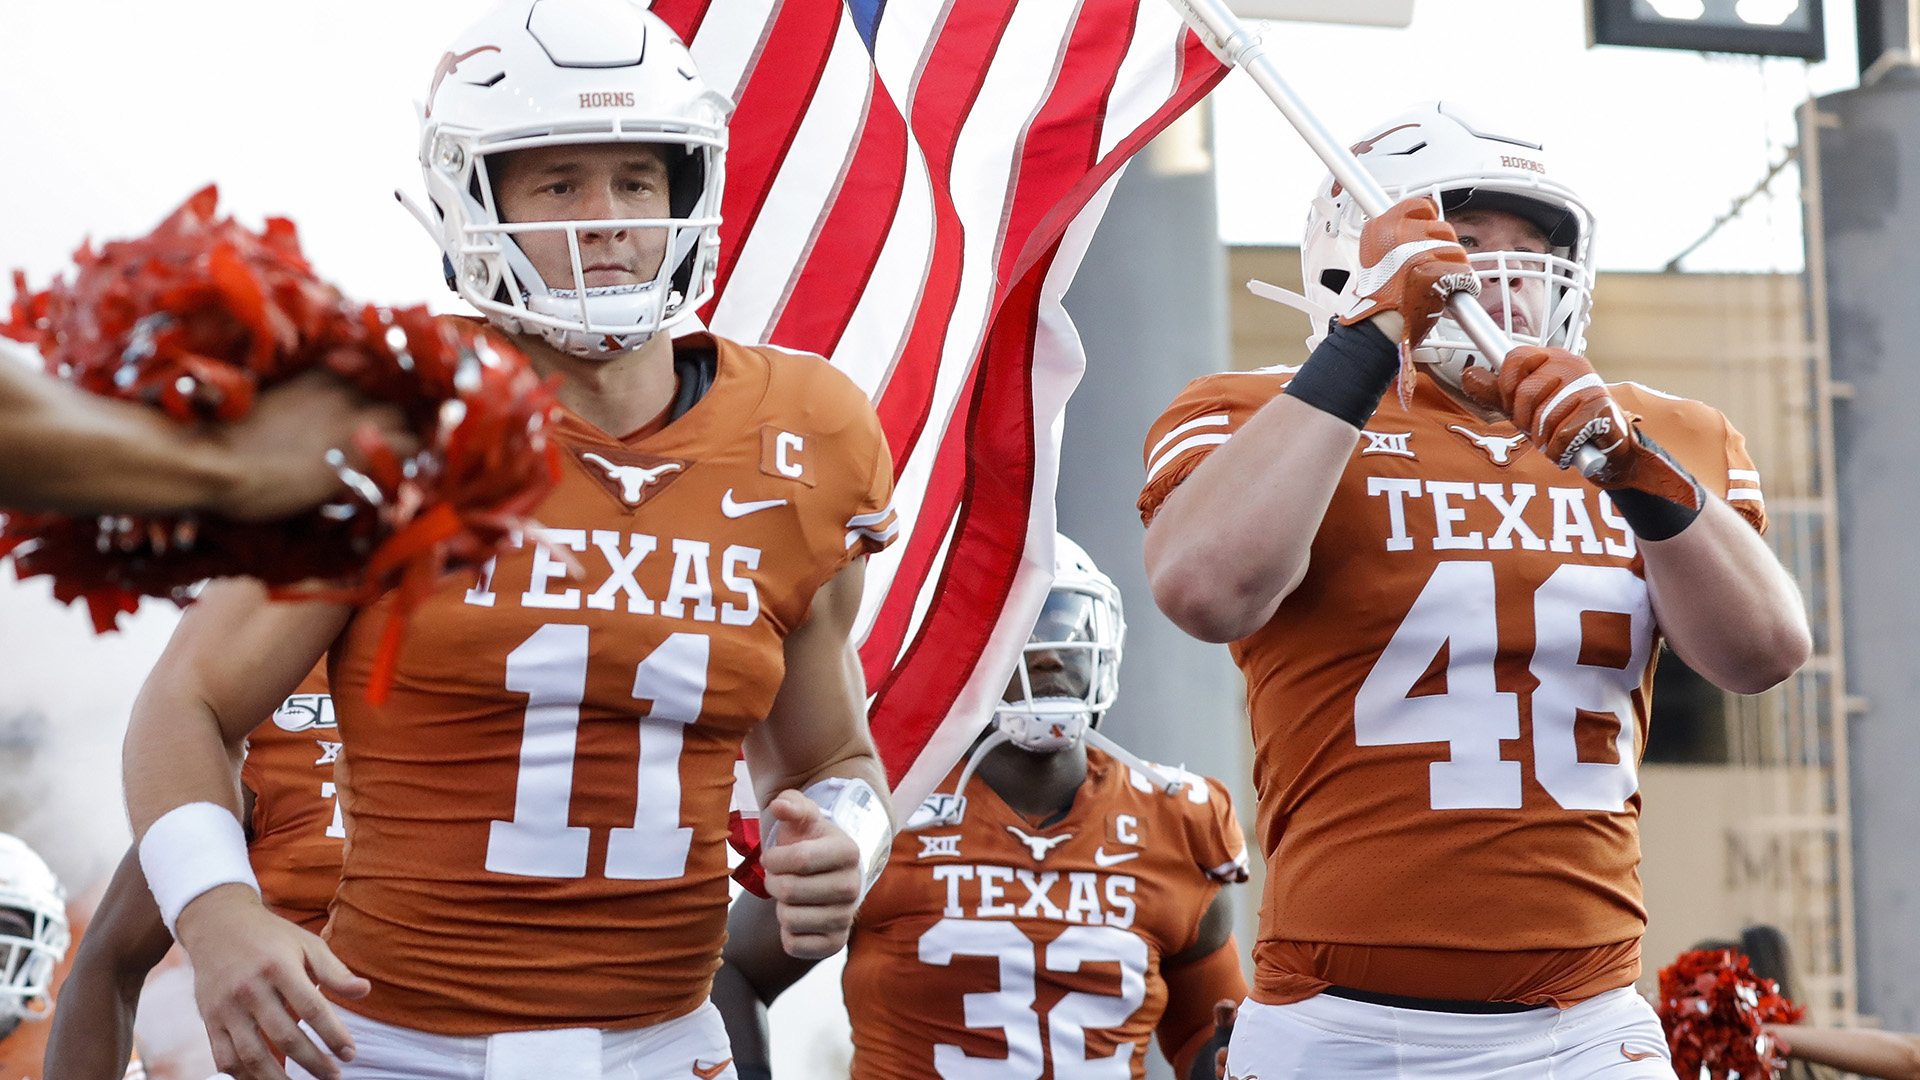 Univ. of Texas LB Jake Ehlinger Found Dead Days After Brother Drafted Into NFL